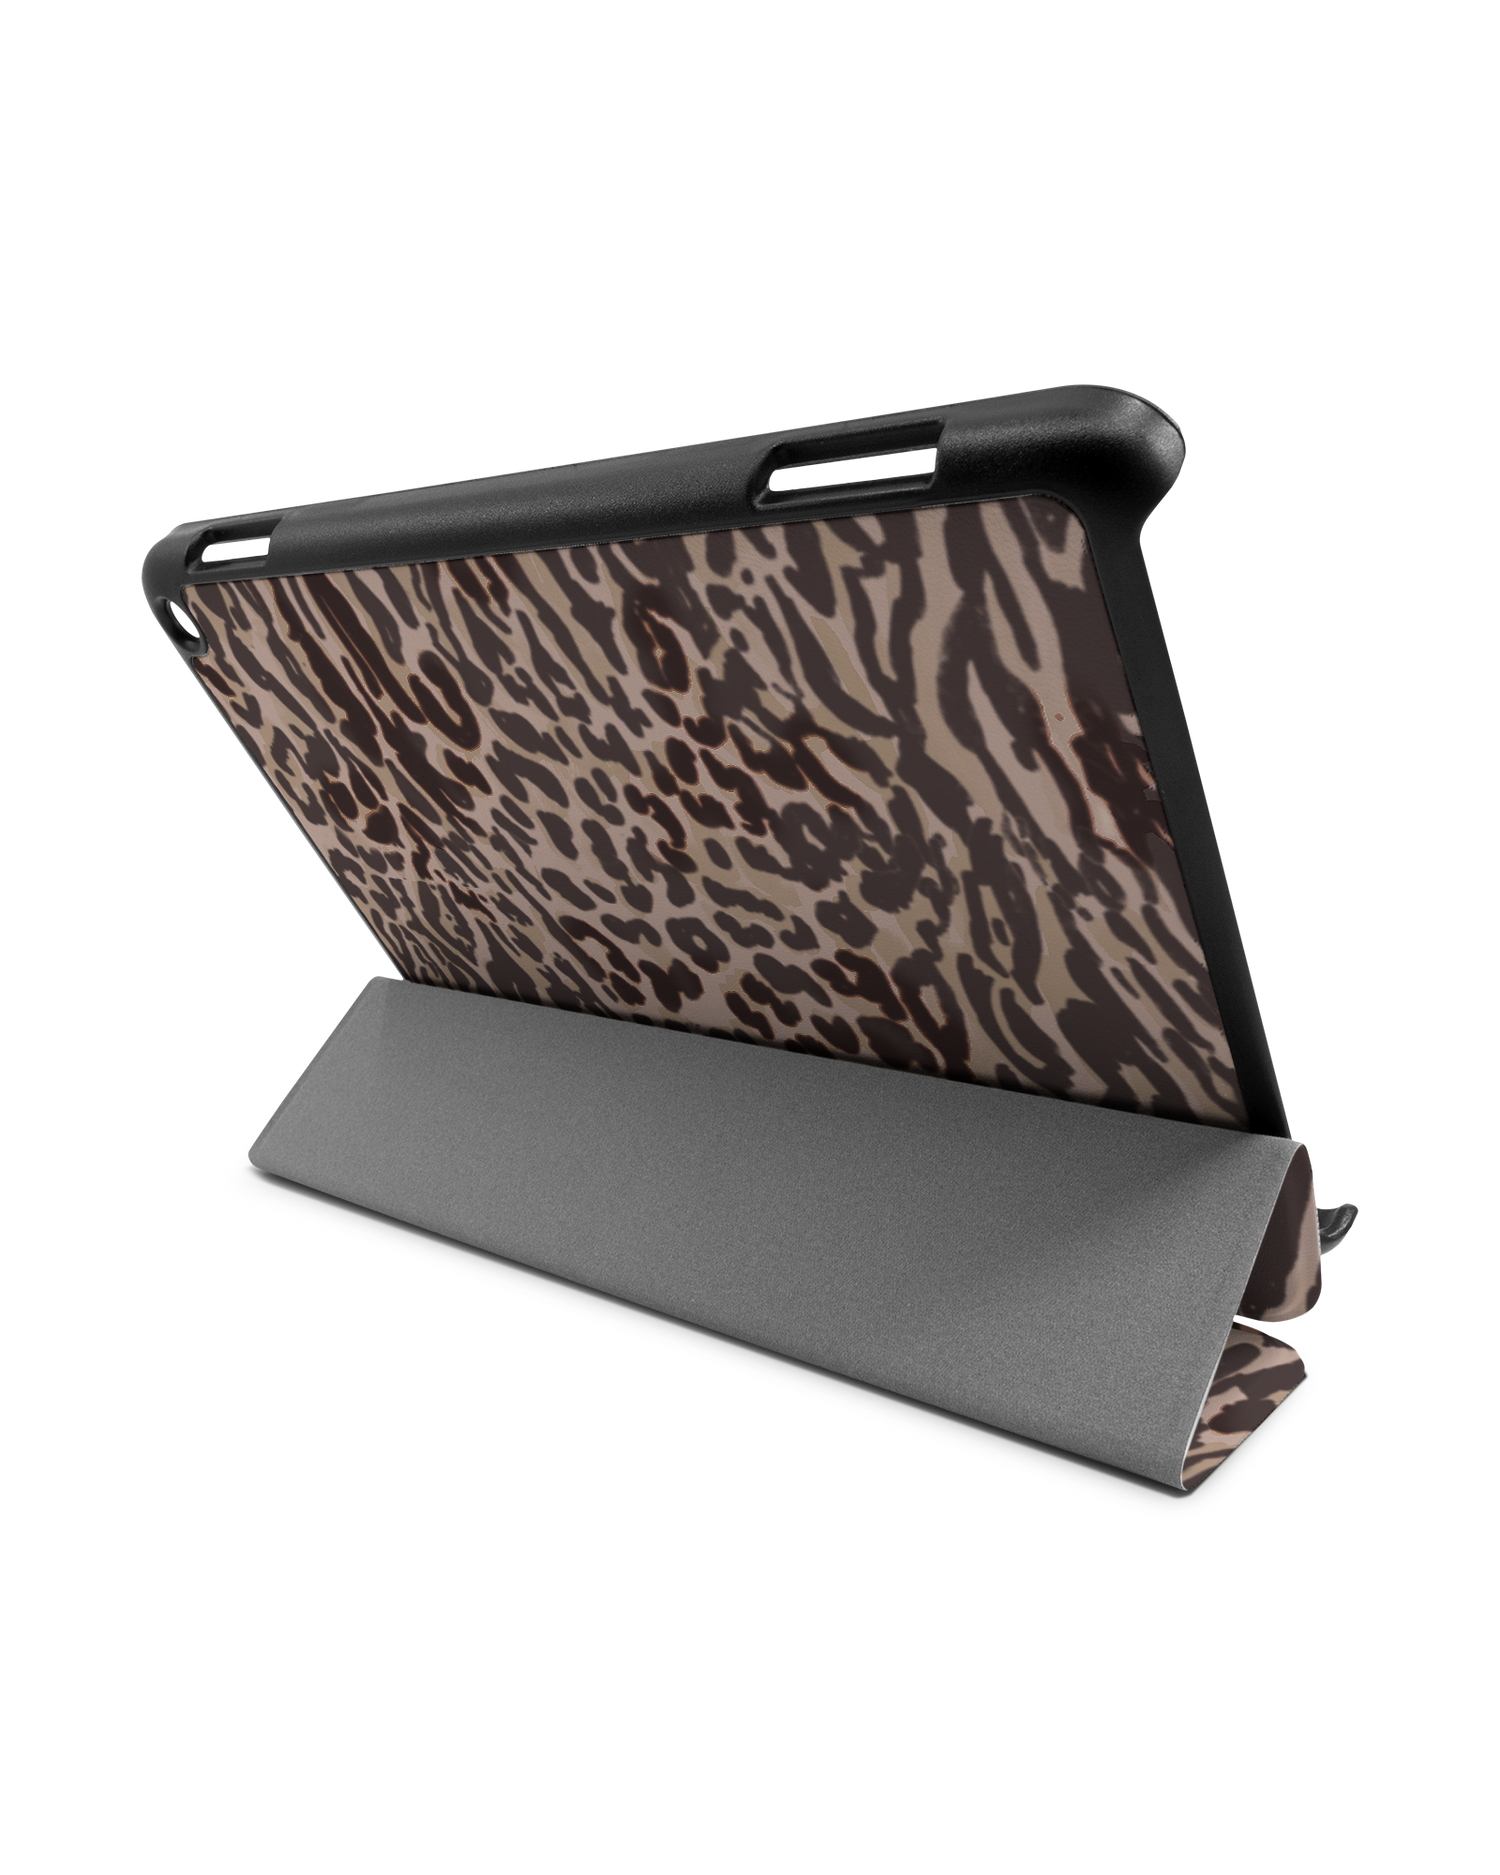 Animal Skin Tough Love Tablet Smart Case for Amazon Fire HD 8 (2022), Amazon Fire HD 8 Plus (2022), Amazon Fire HD 8 (2020), Amazon Fire HD 8 Plus (2020): Used as Stand